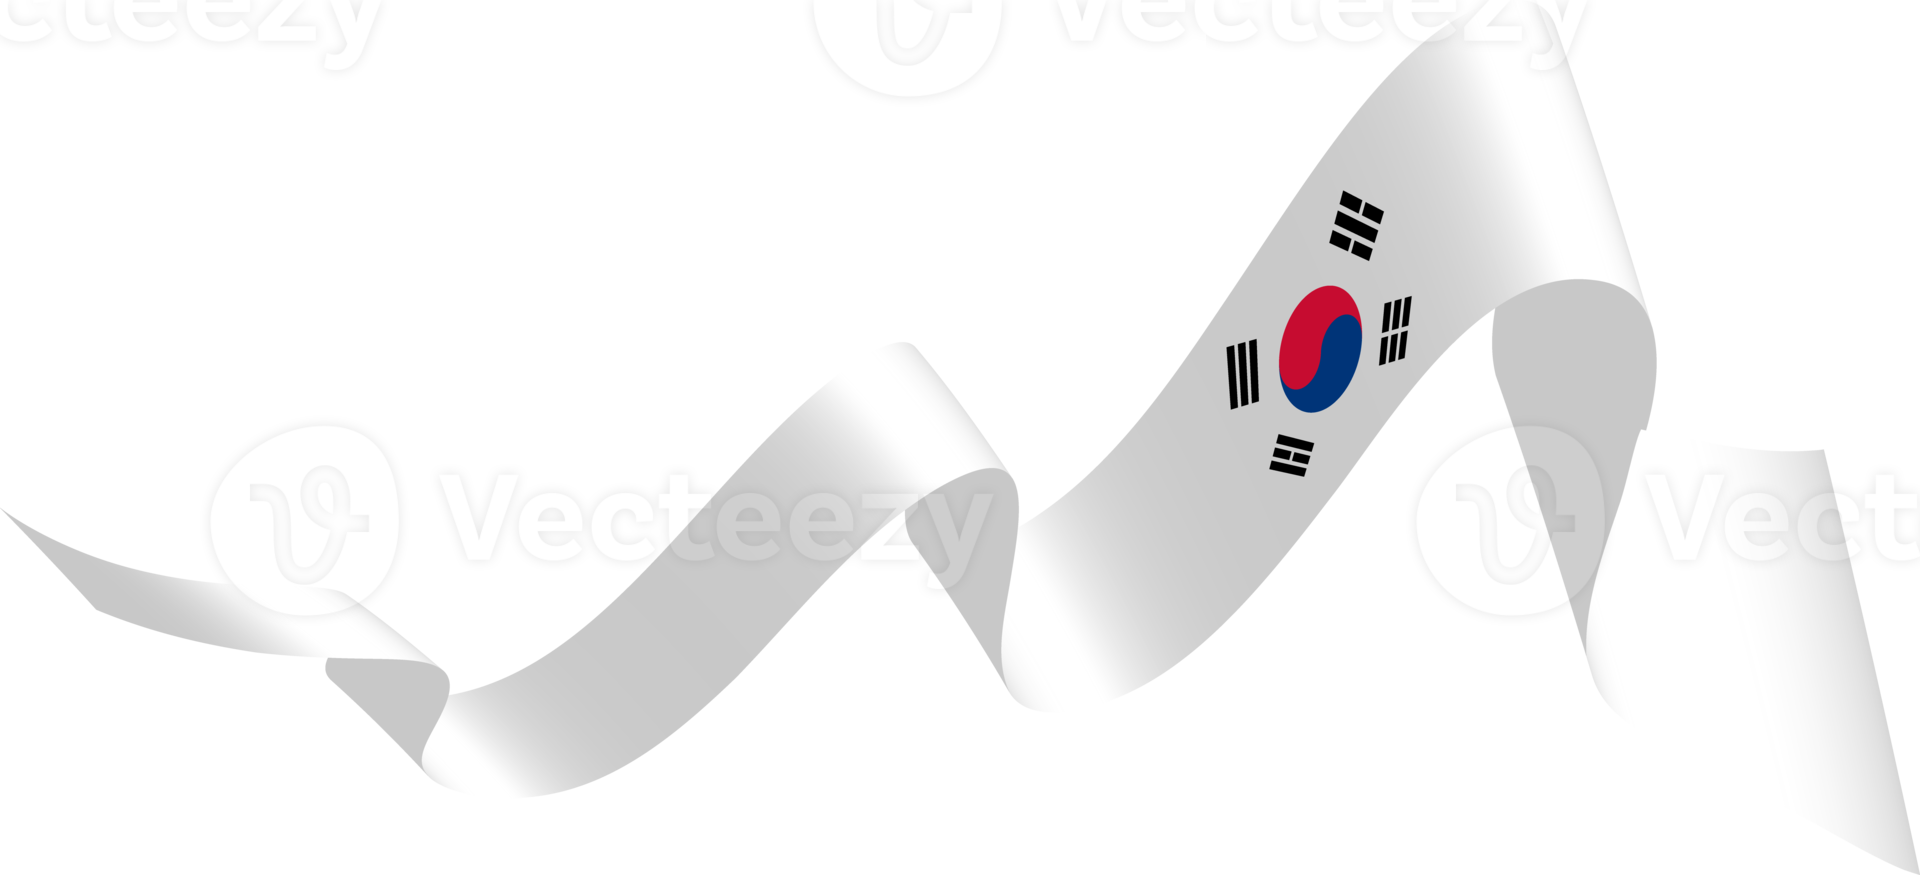 Korean flag ribbon independence day ornament png